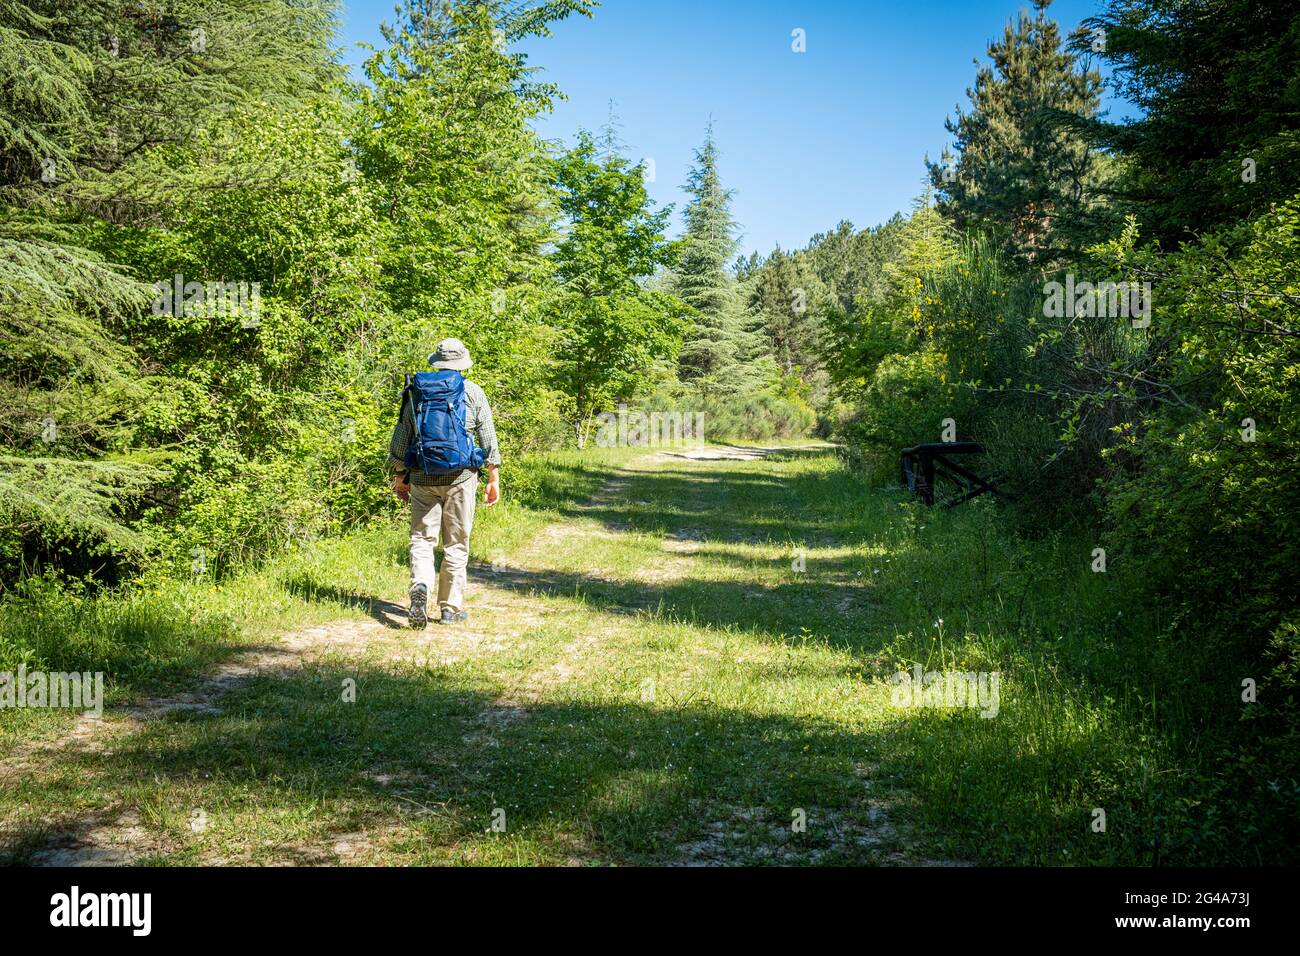 Man with backpack walking in the countryside. Podere Montebello, Modigliana, Forlì, Emilia Romagna, Italy, Europe. Stock Photo